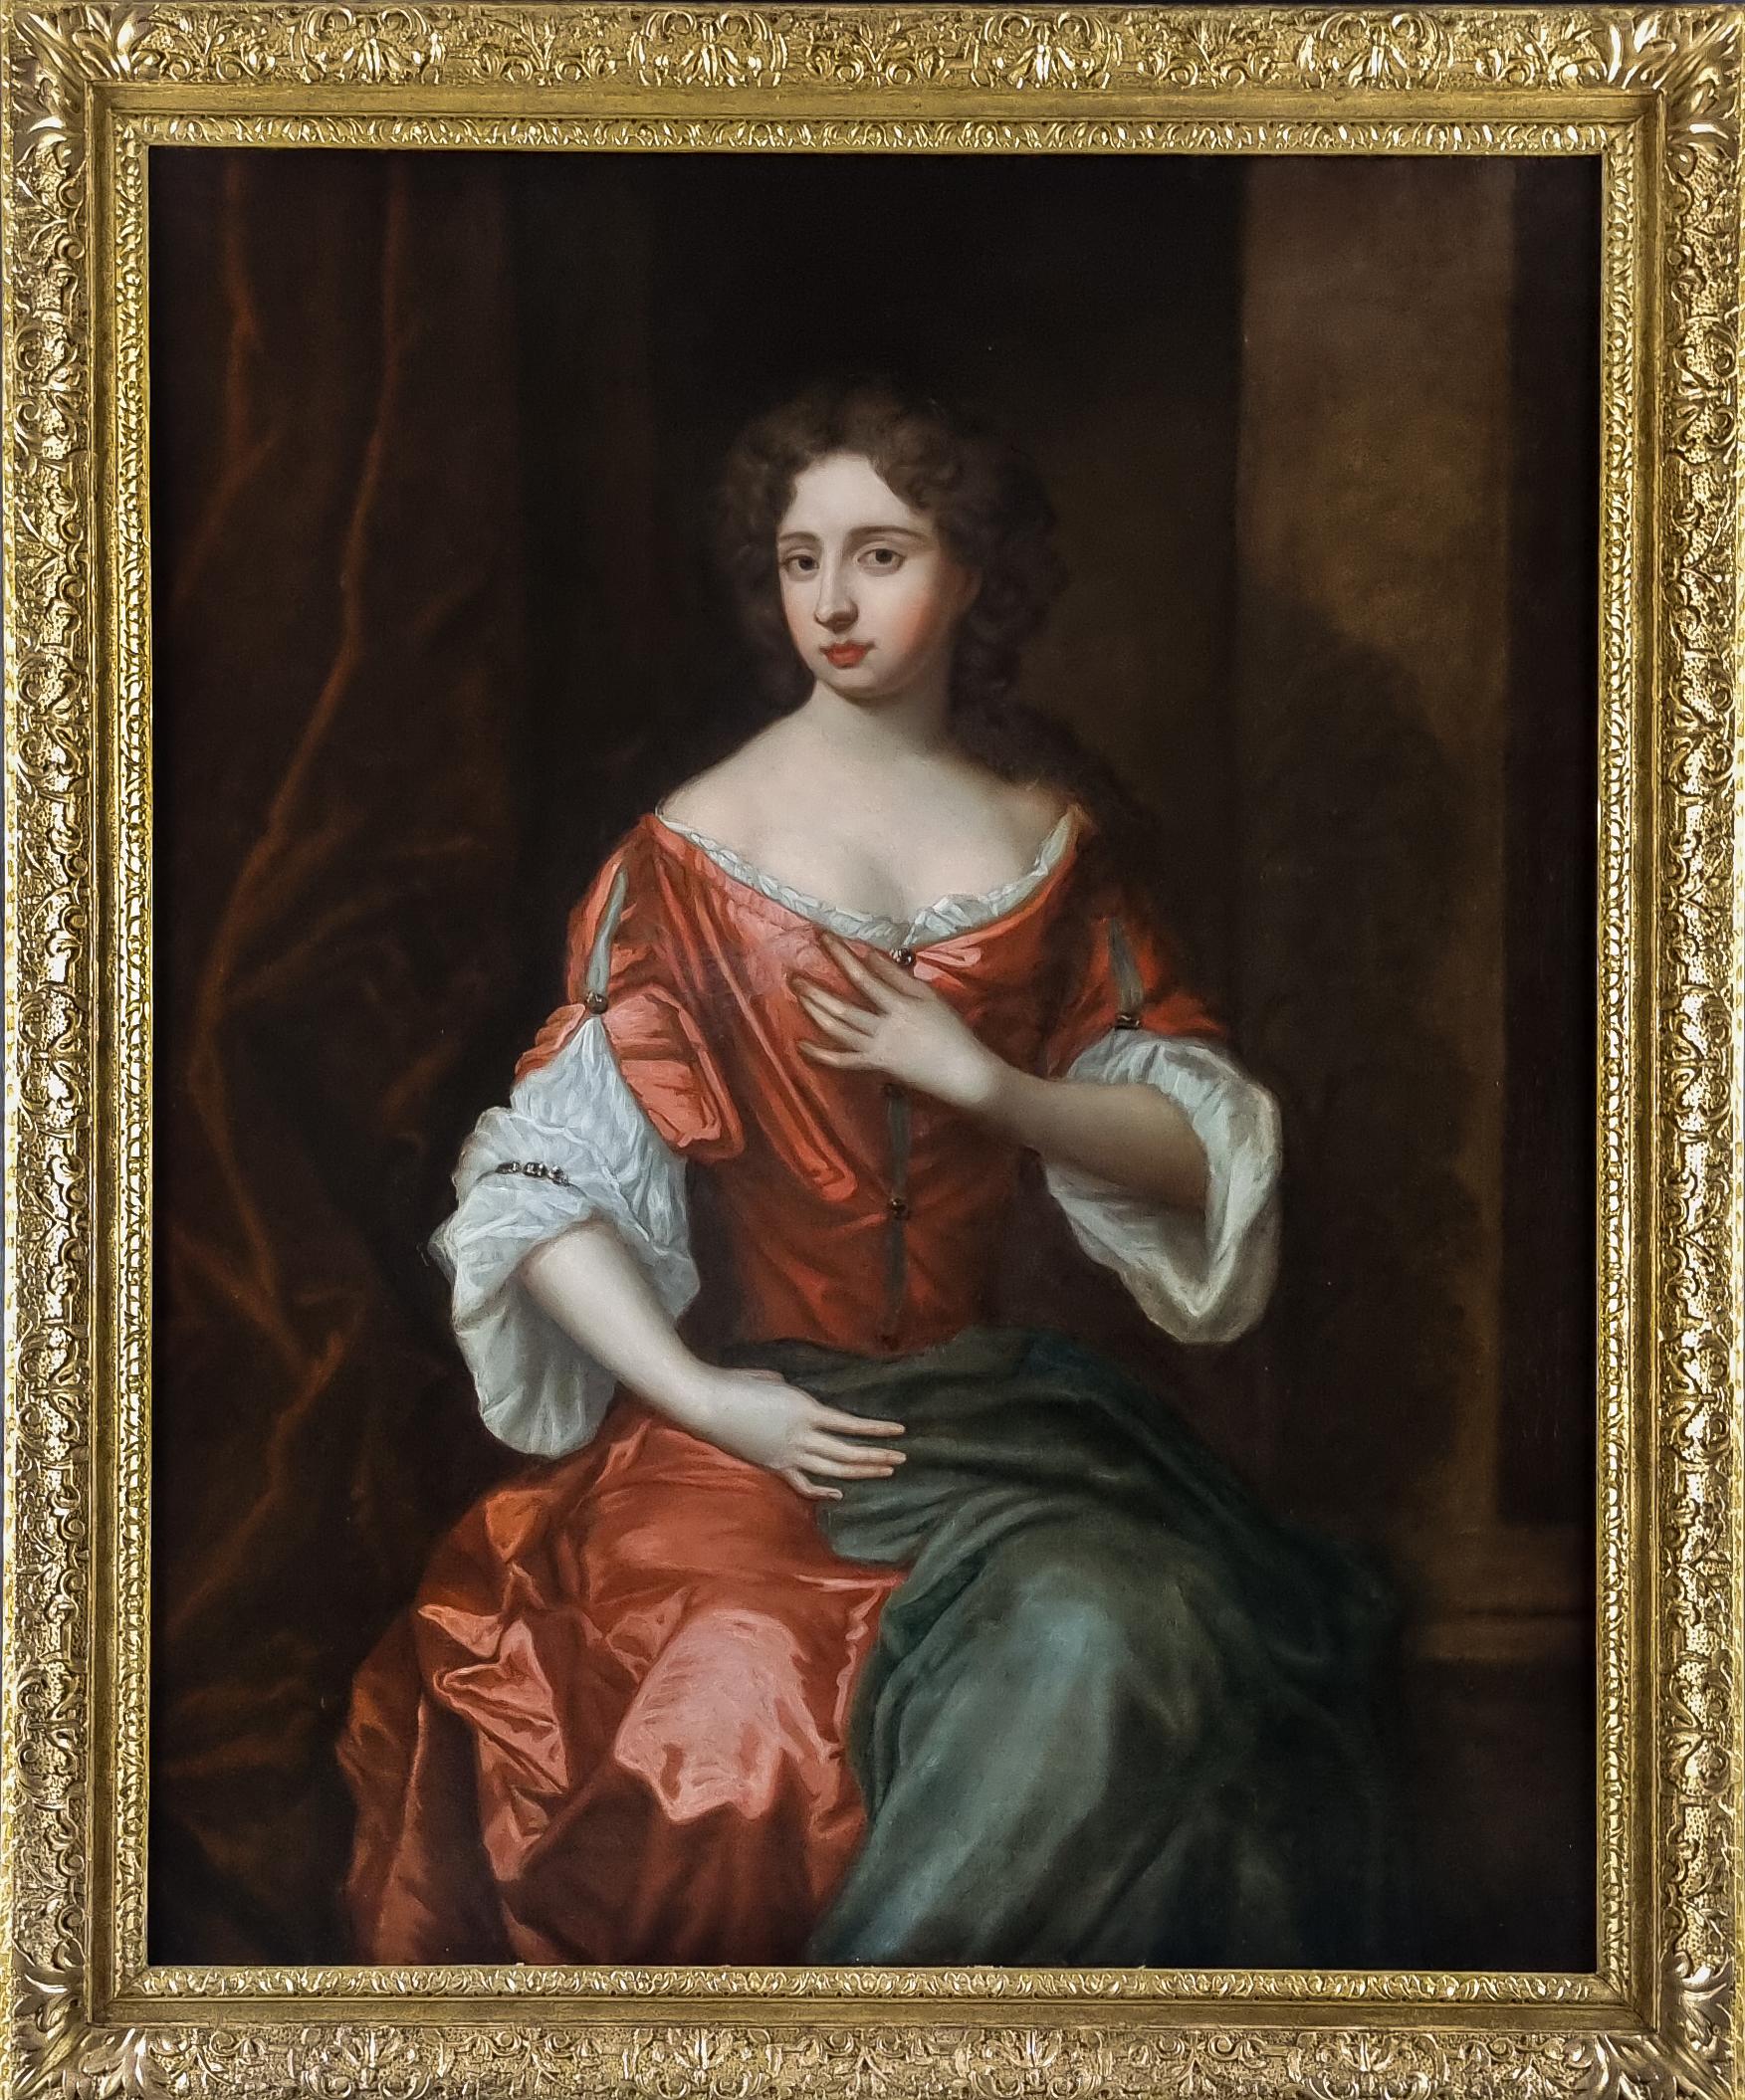 William Wissing Portrait Painting - Portrait of a Lady in Red Dress on Porch c.1680, English Aristocratic Provenance